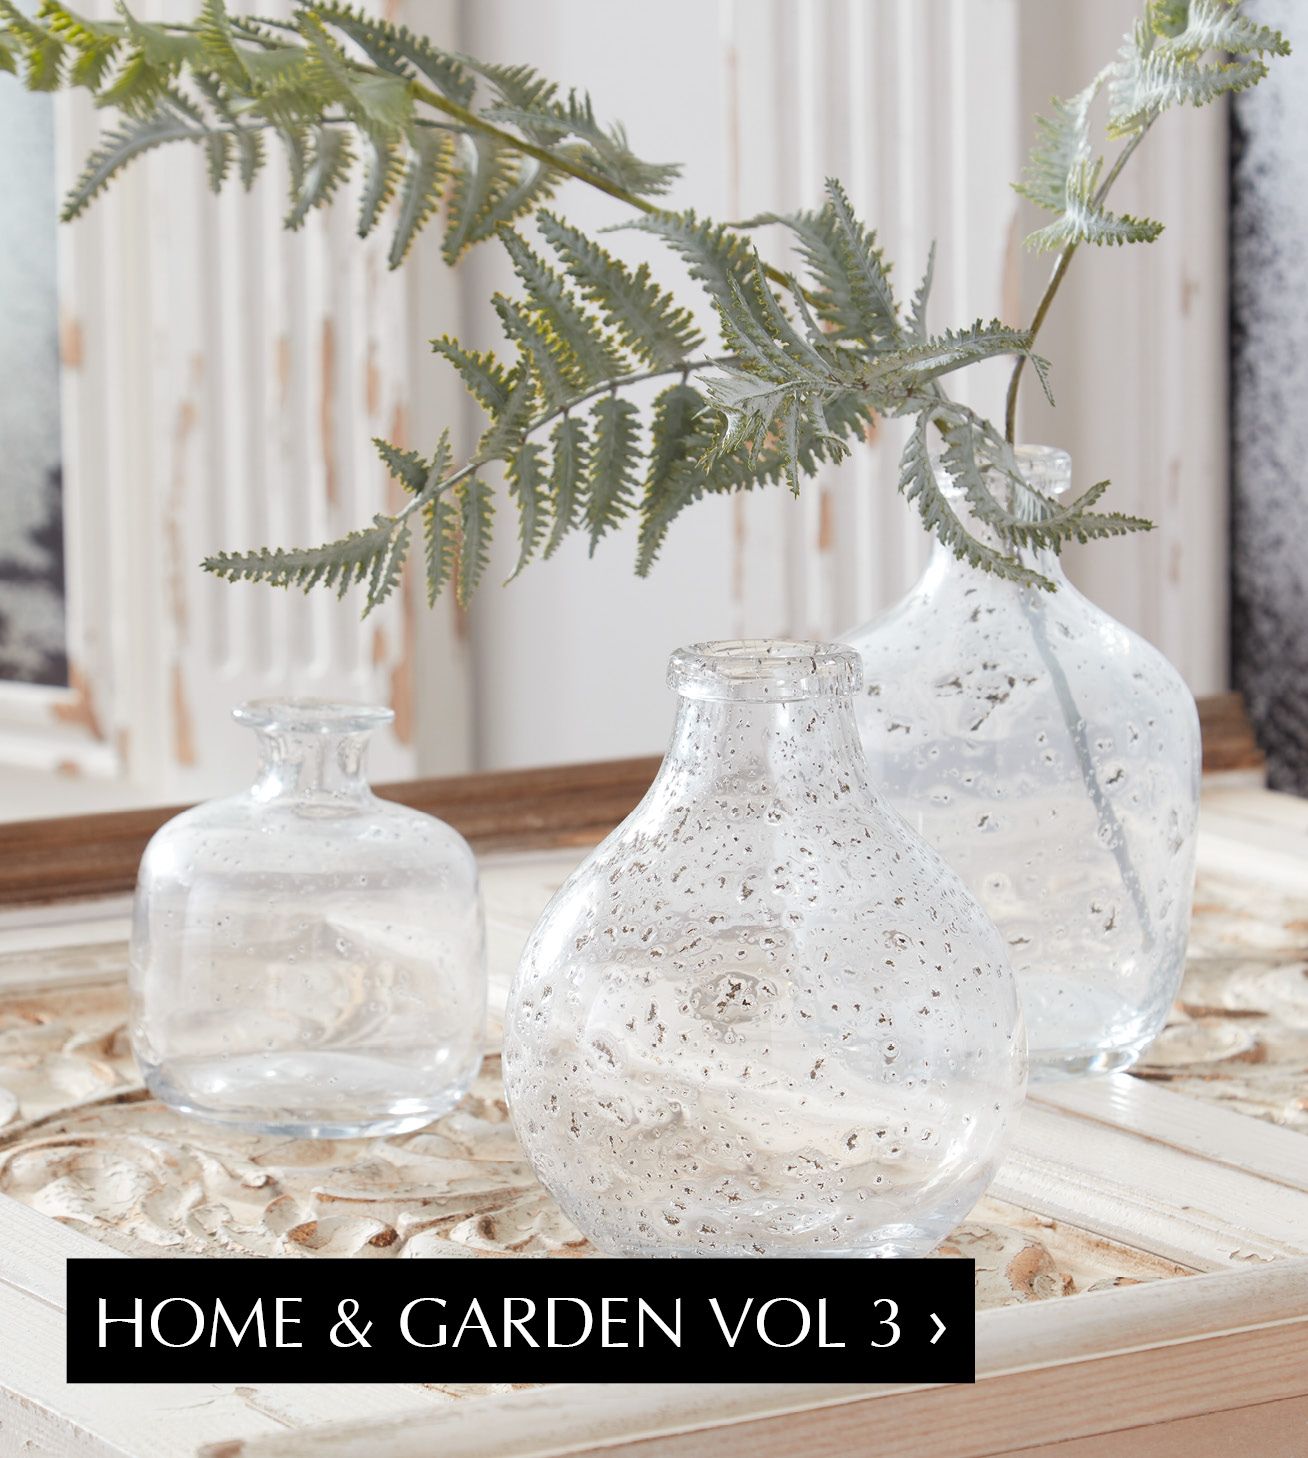 Link to Home and Garden Vol 3 Catalog; glass vases with a fern stem in one